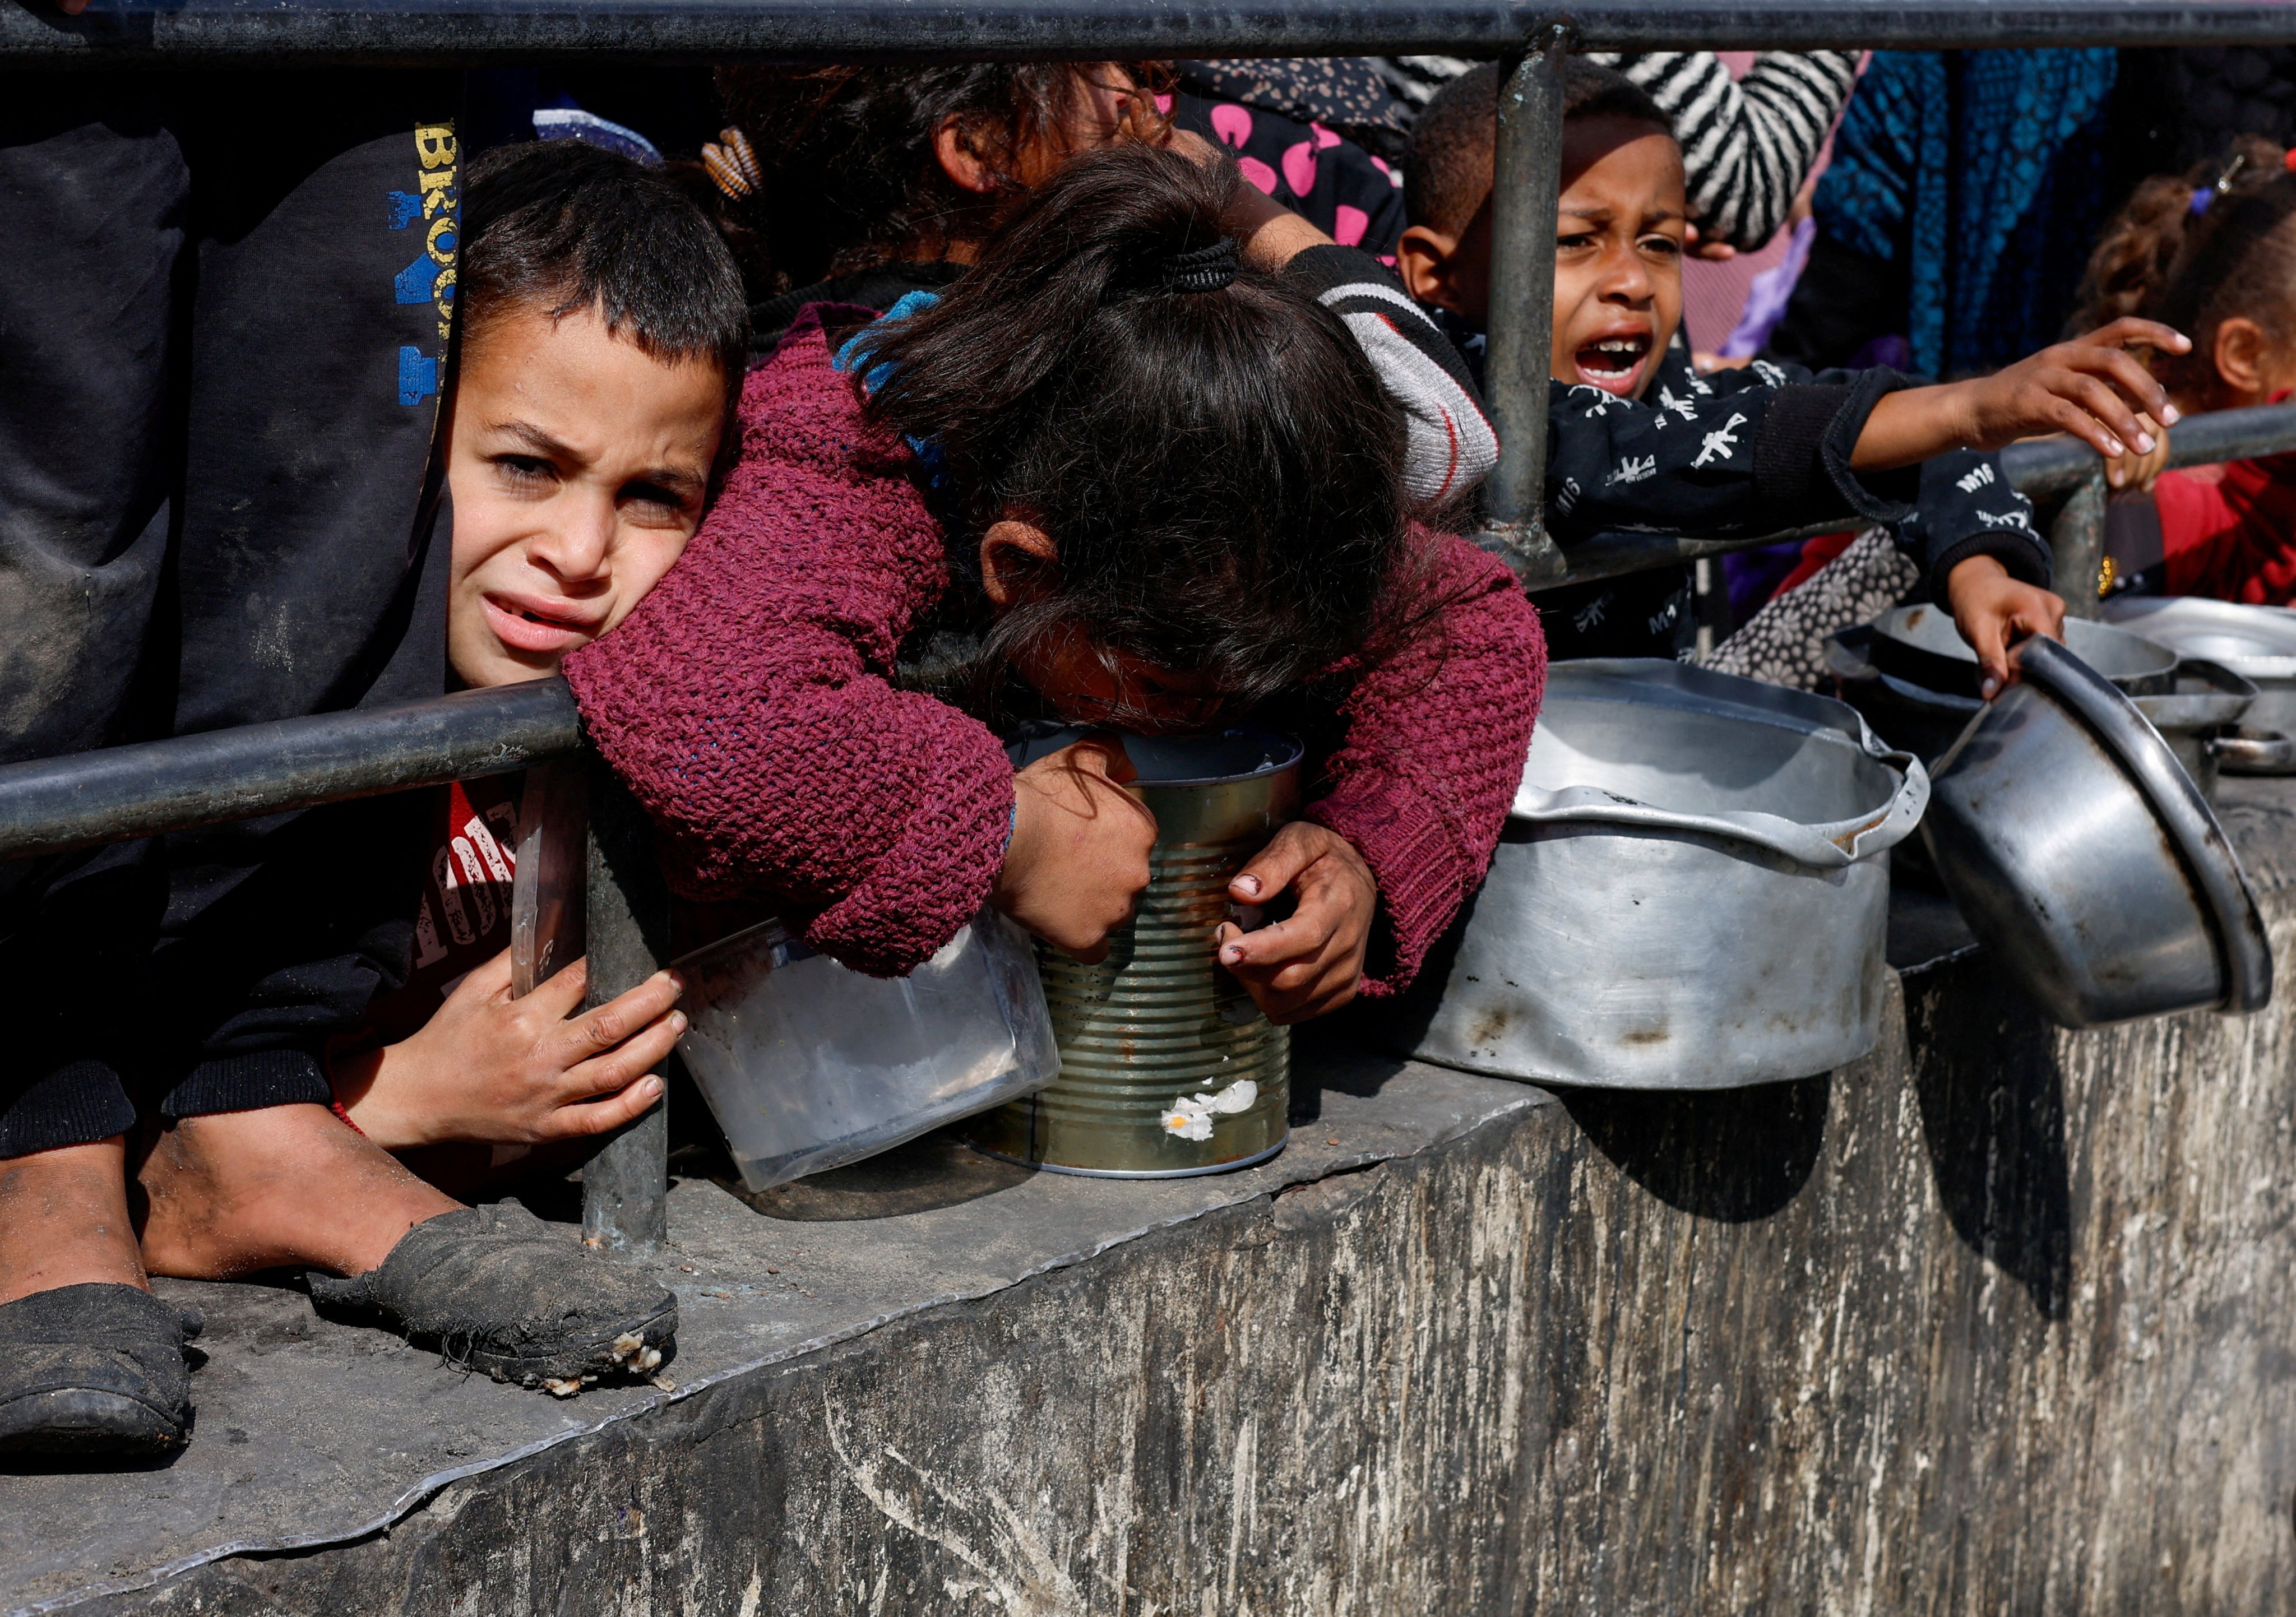 Palestinian children wait to receive food cooked by a charity kitchen on February 20, as the United Nations Security Council fails to pass a resolution calling for a ceasefire. Photo: Reuters